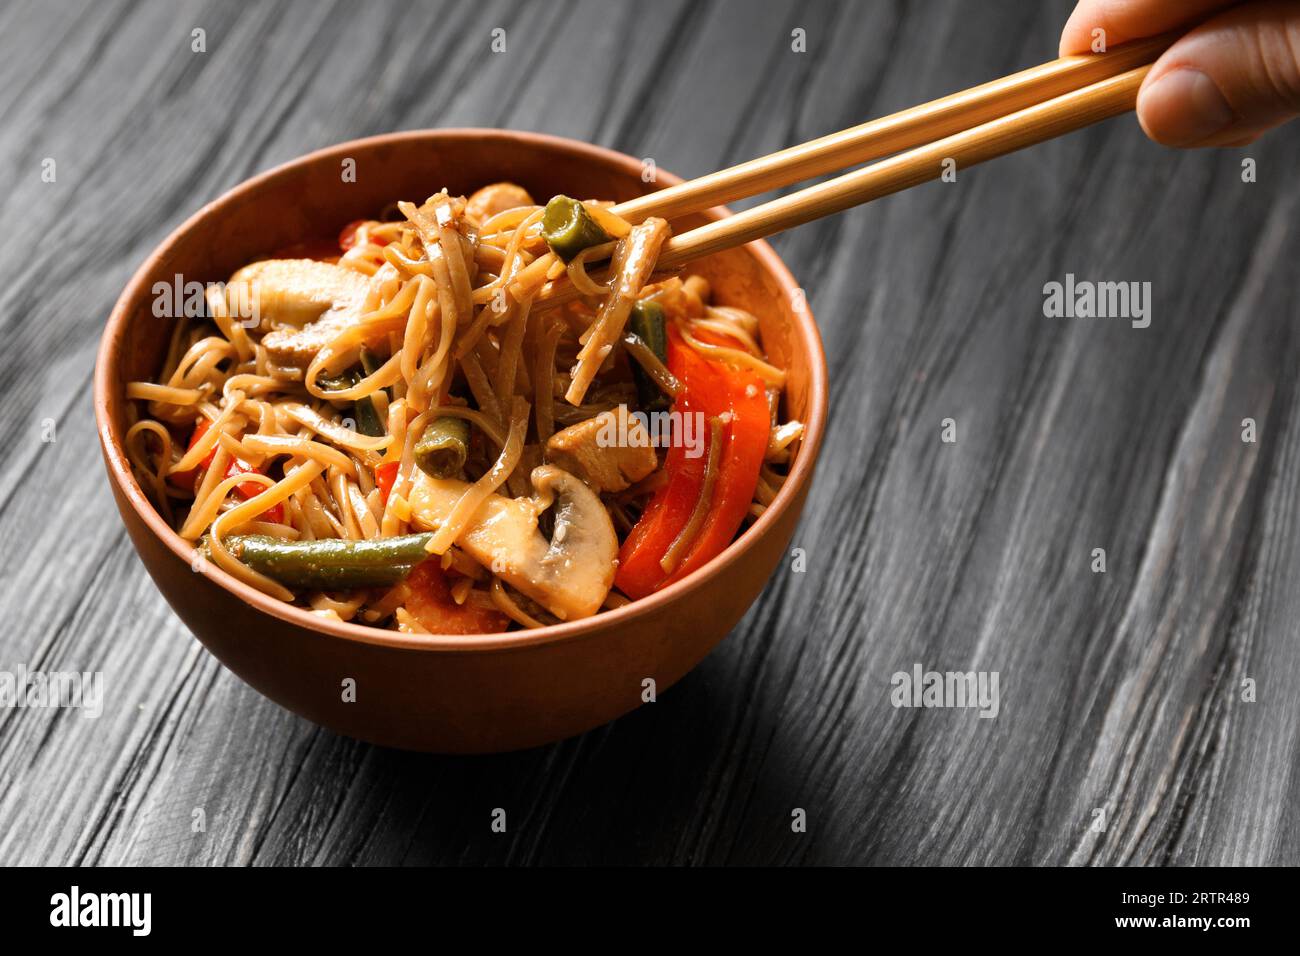 https://c8.alamy.com/comp/2RTR489/plate-with-buckwheat-noodles-with-vegetables-mushrooms-chicken-meat-on-a-dark-background-top-view-chinese-sticks-take-japanese-soba-2RTR489.jpg